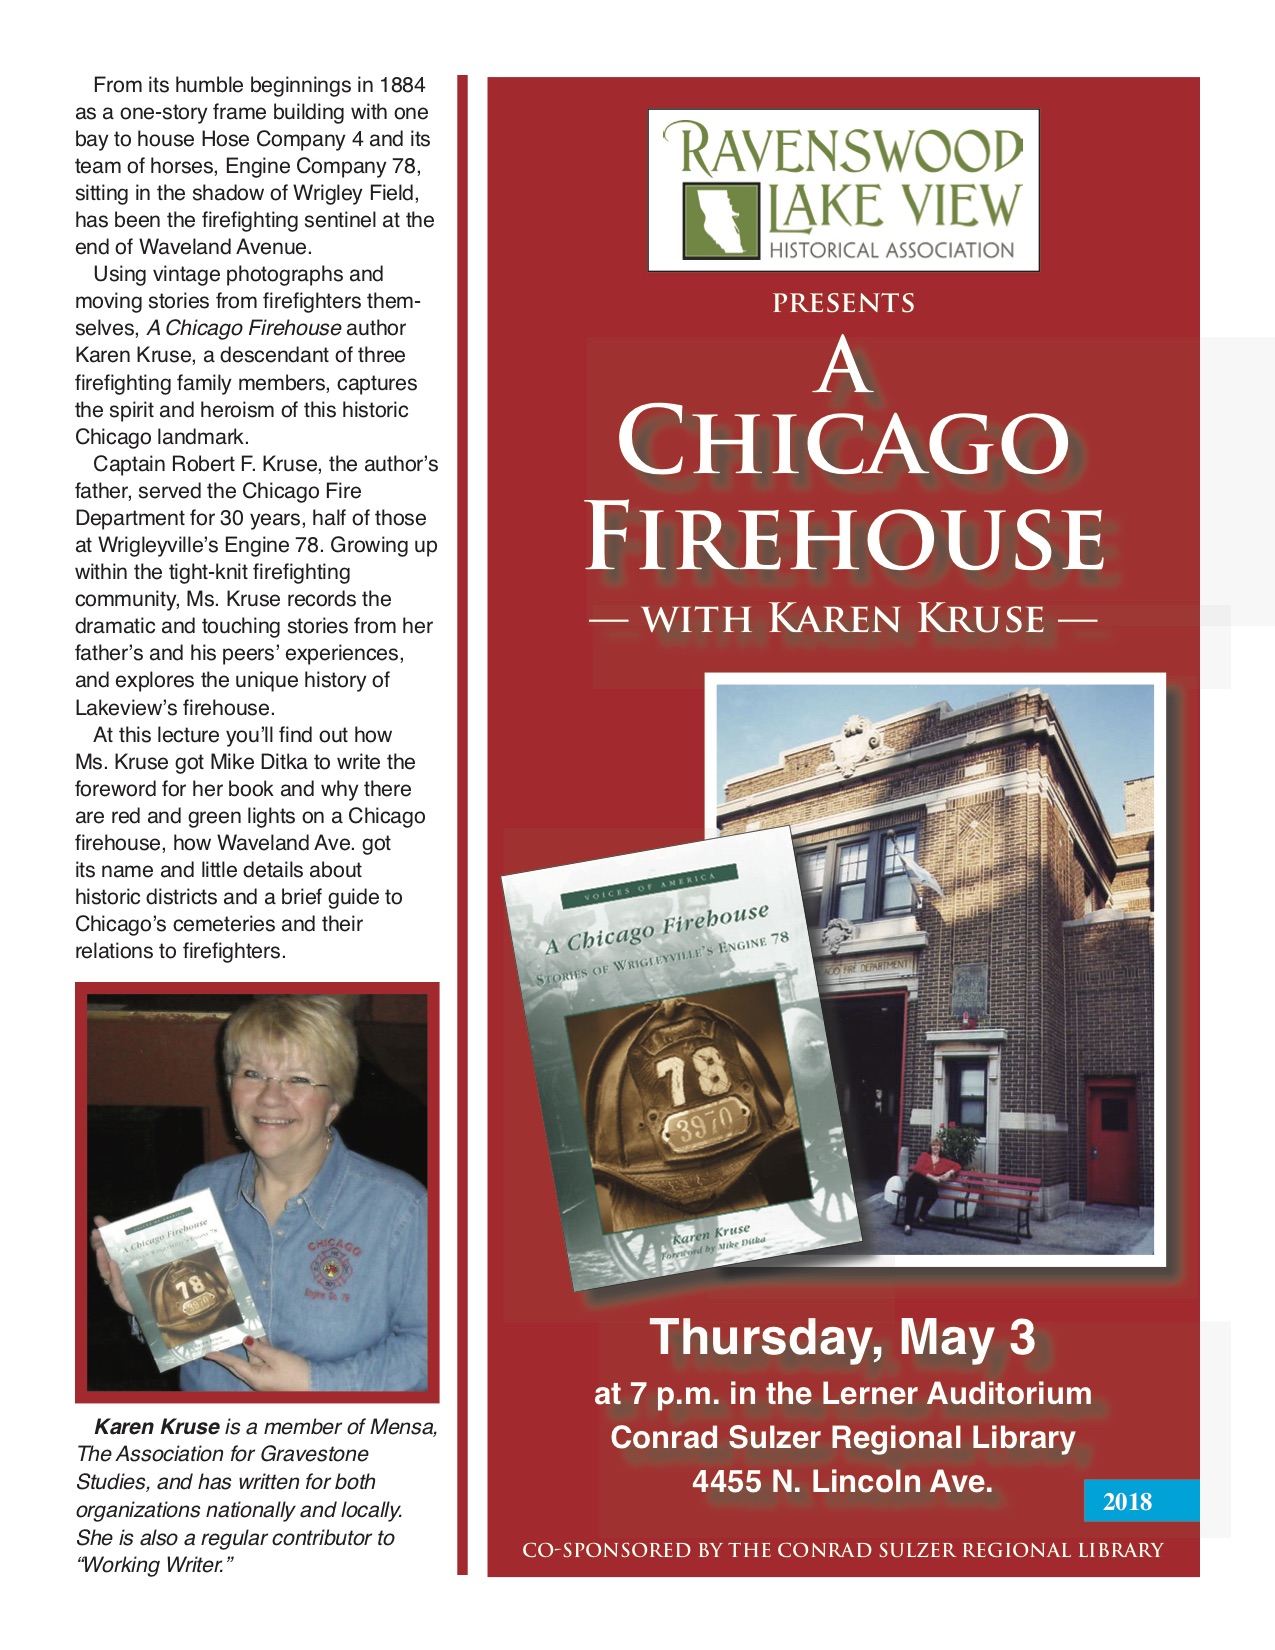 A Chicago Firehouse, with Karen Kruse - Thurs May 3, 7pm - Lerner Auditorium, Conrad Sulzer Regional Library, 4455 N. Lincoln Ave.